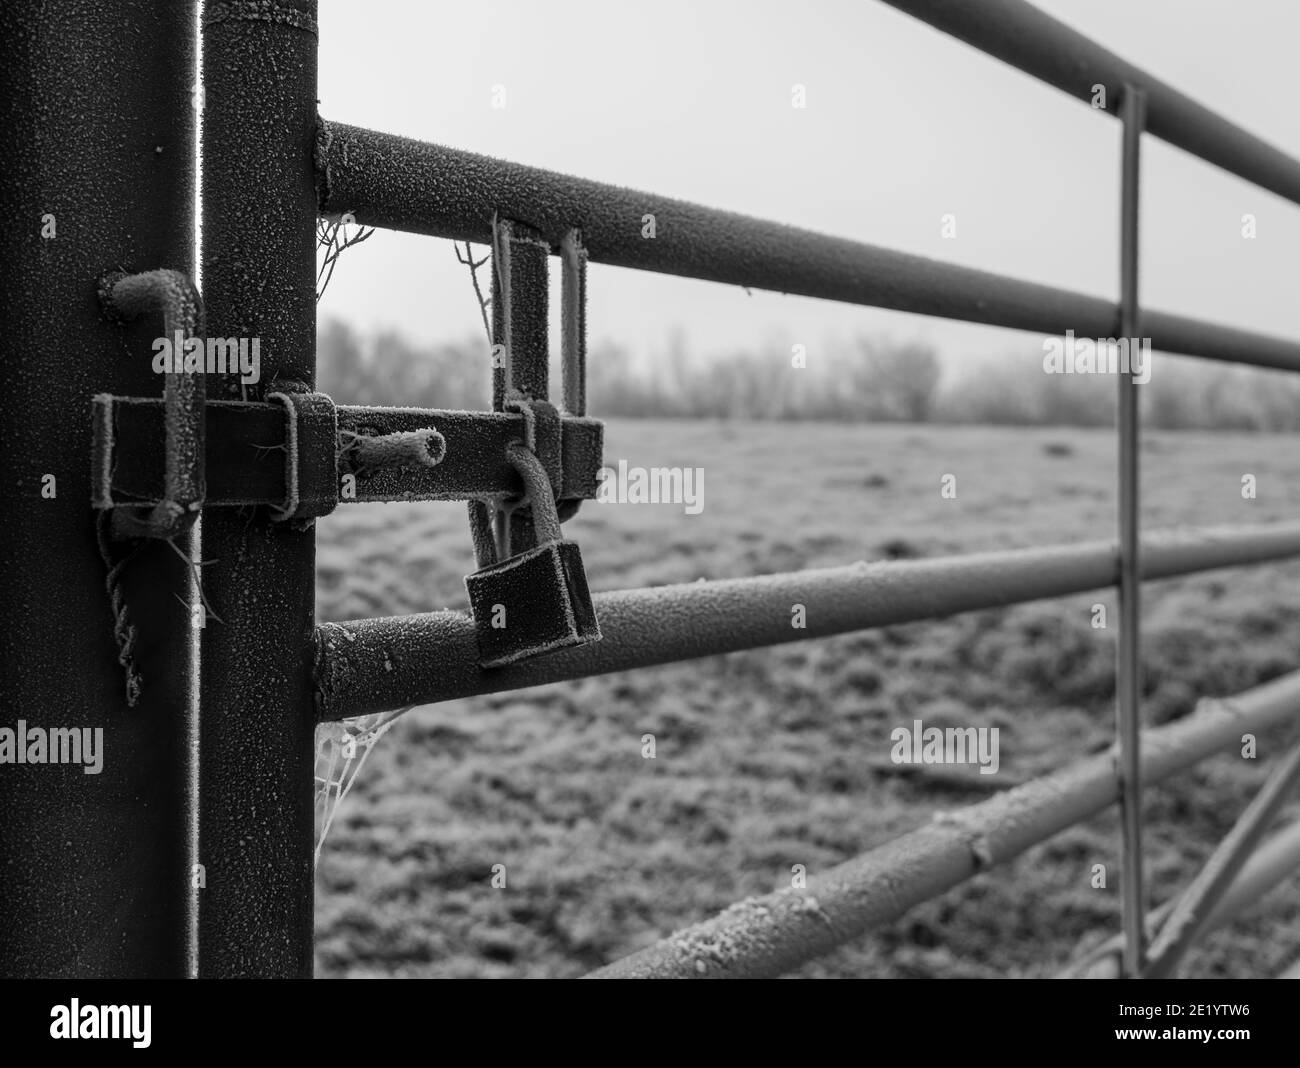 Frozen bolt and lock on a farm gate Stock Photo